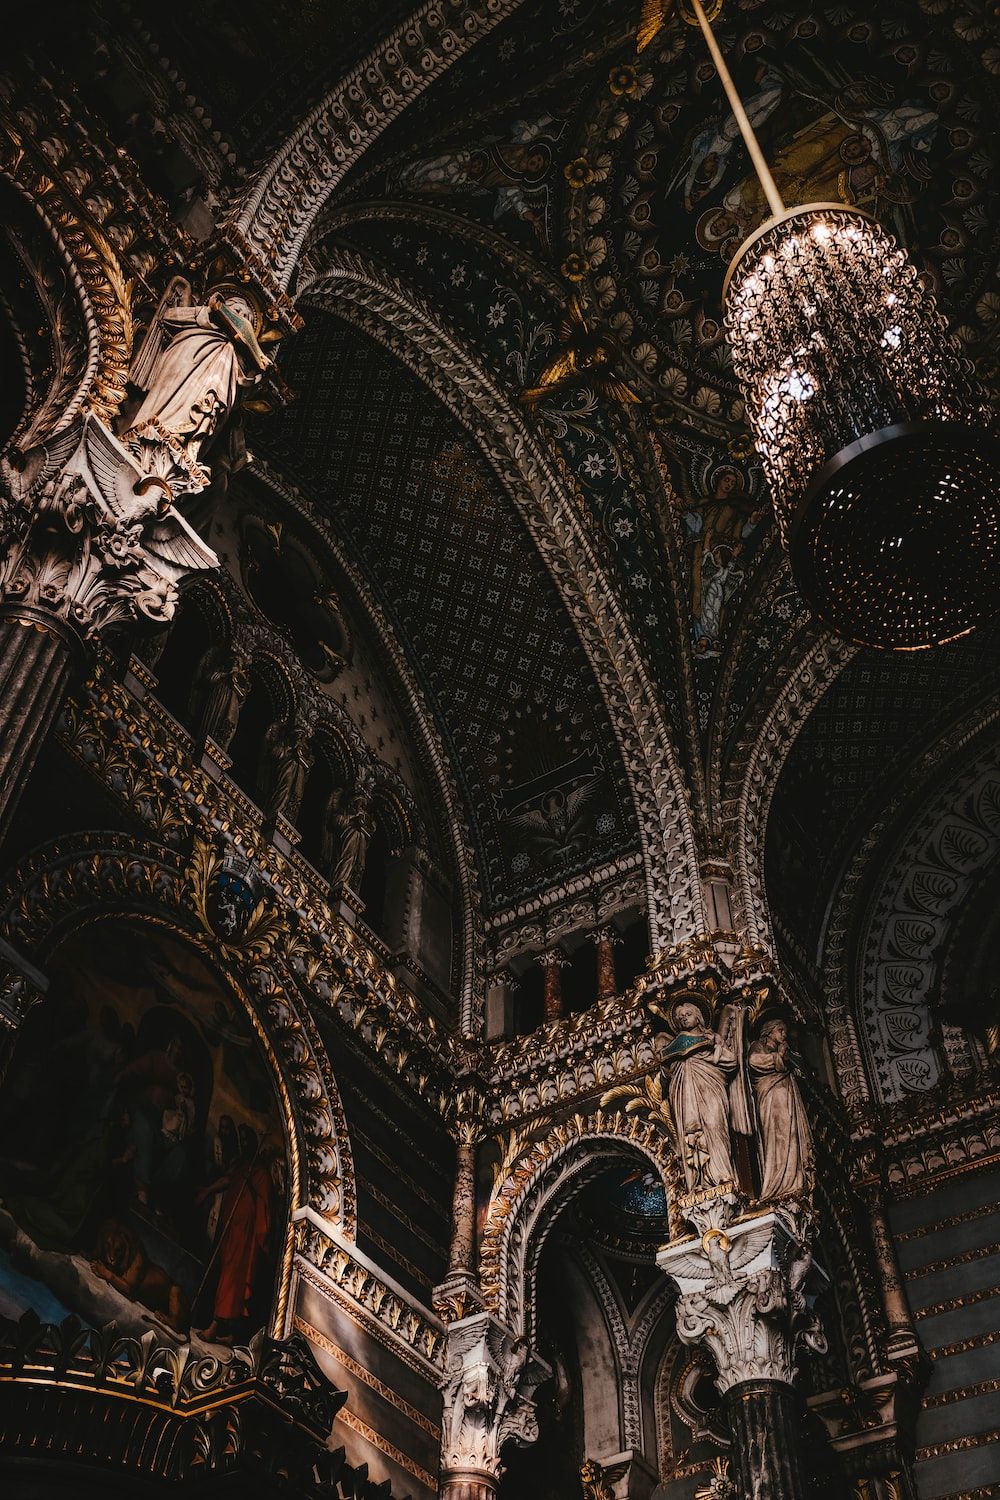 A photograph of the inside of a church with ornate architecture and statues. - Dark academia, royalcore